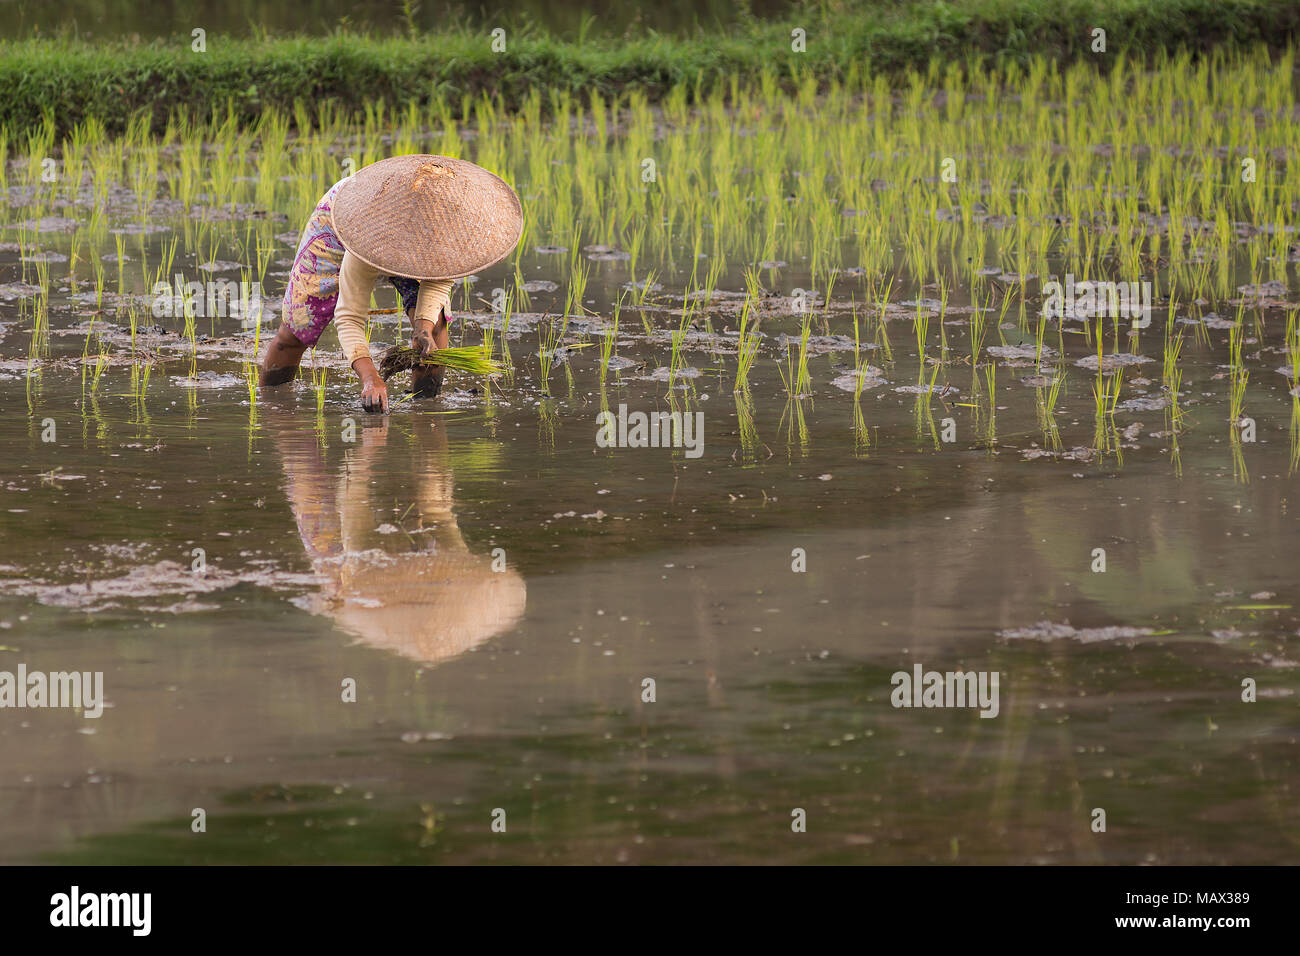 Local Indonesian woman with sun protection head ware hats plant young rice plants in to a flooded rice paddy field ready for the growing season. Stock Photo